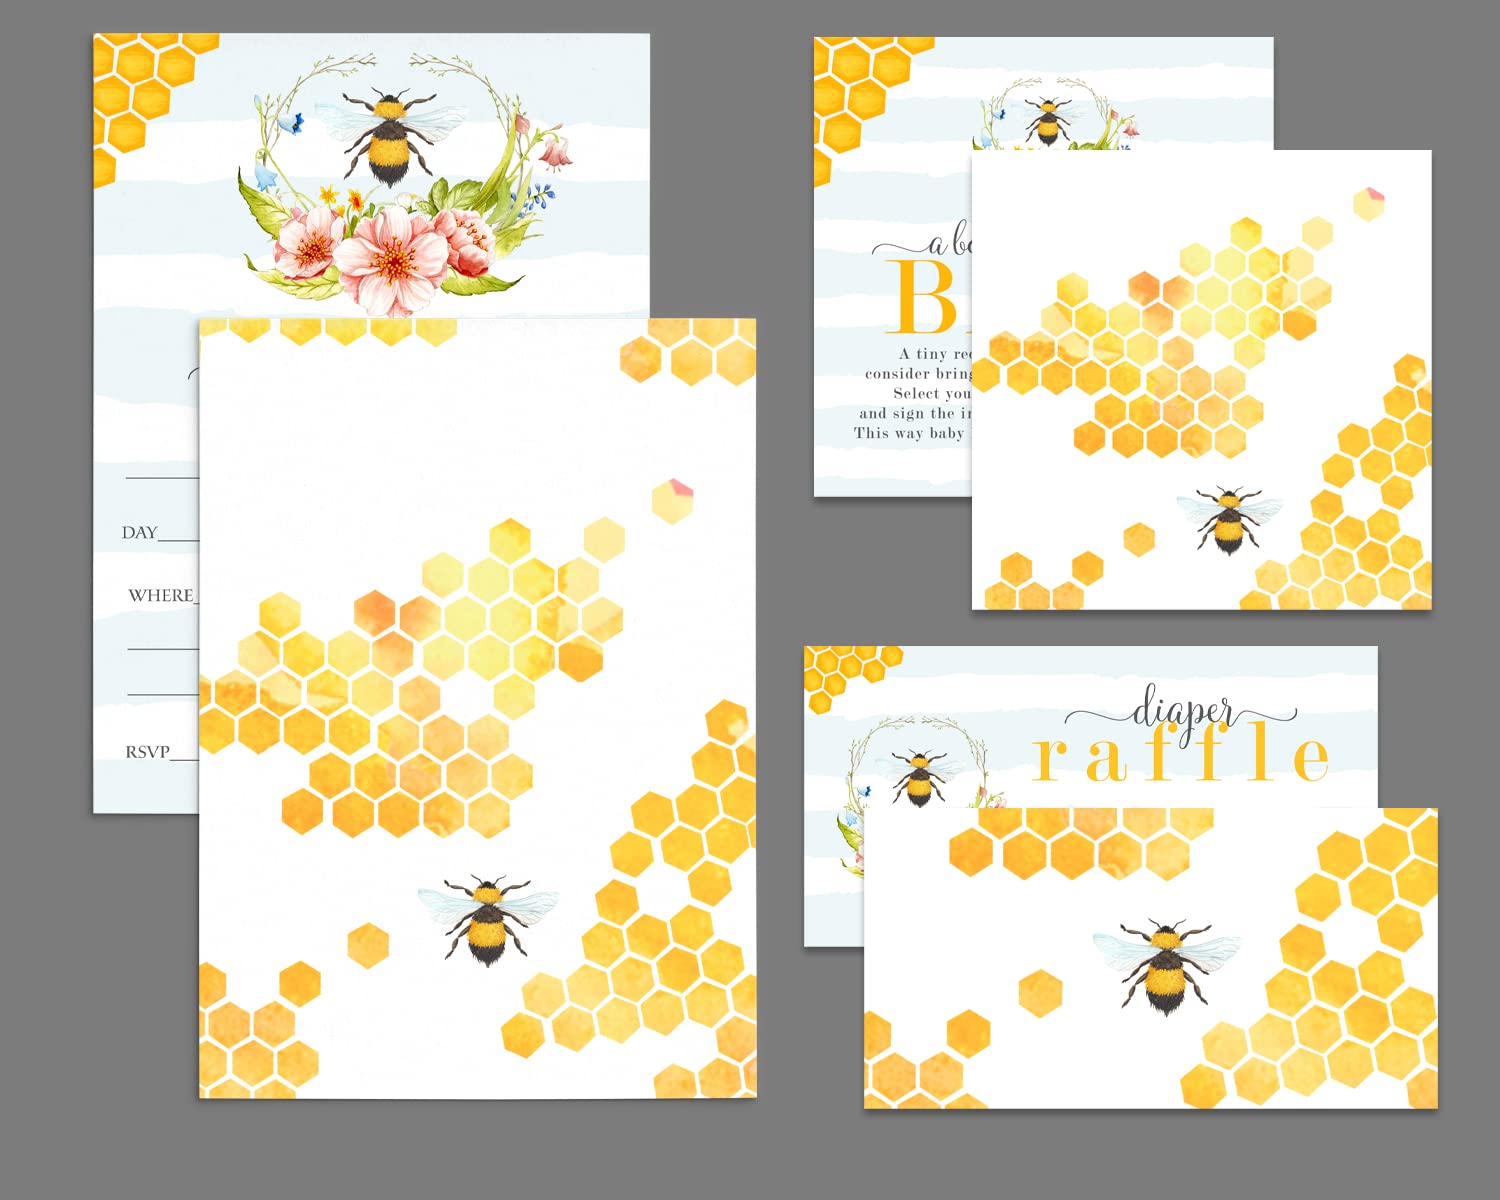 Bumblebee Baby Shower Invitation Bundle (25 Guests) Pack Includes Diaper Raffle Tickets, Bring a Book Cards, Blank Invites with Envelopes - Bee Theme Gender Reveal